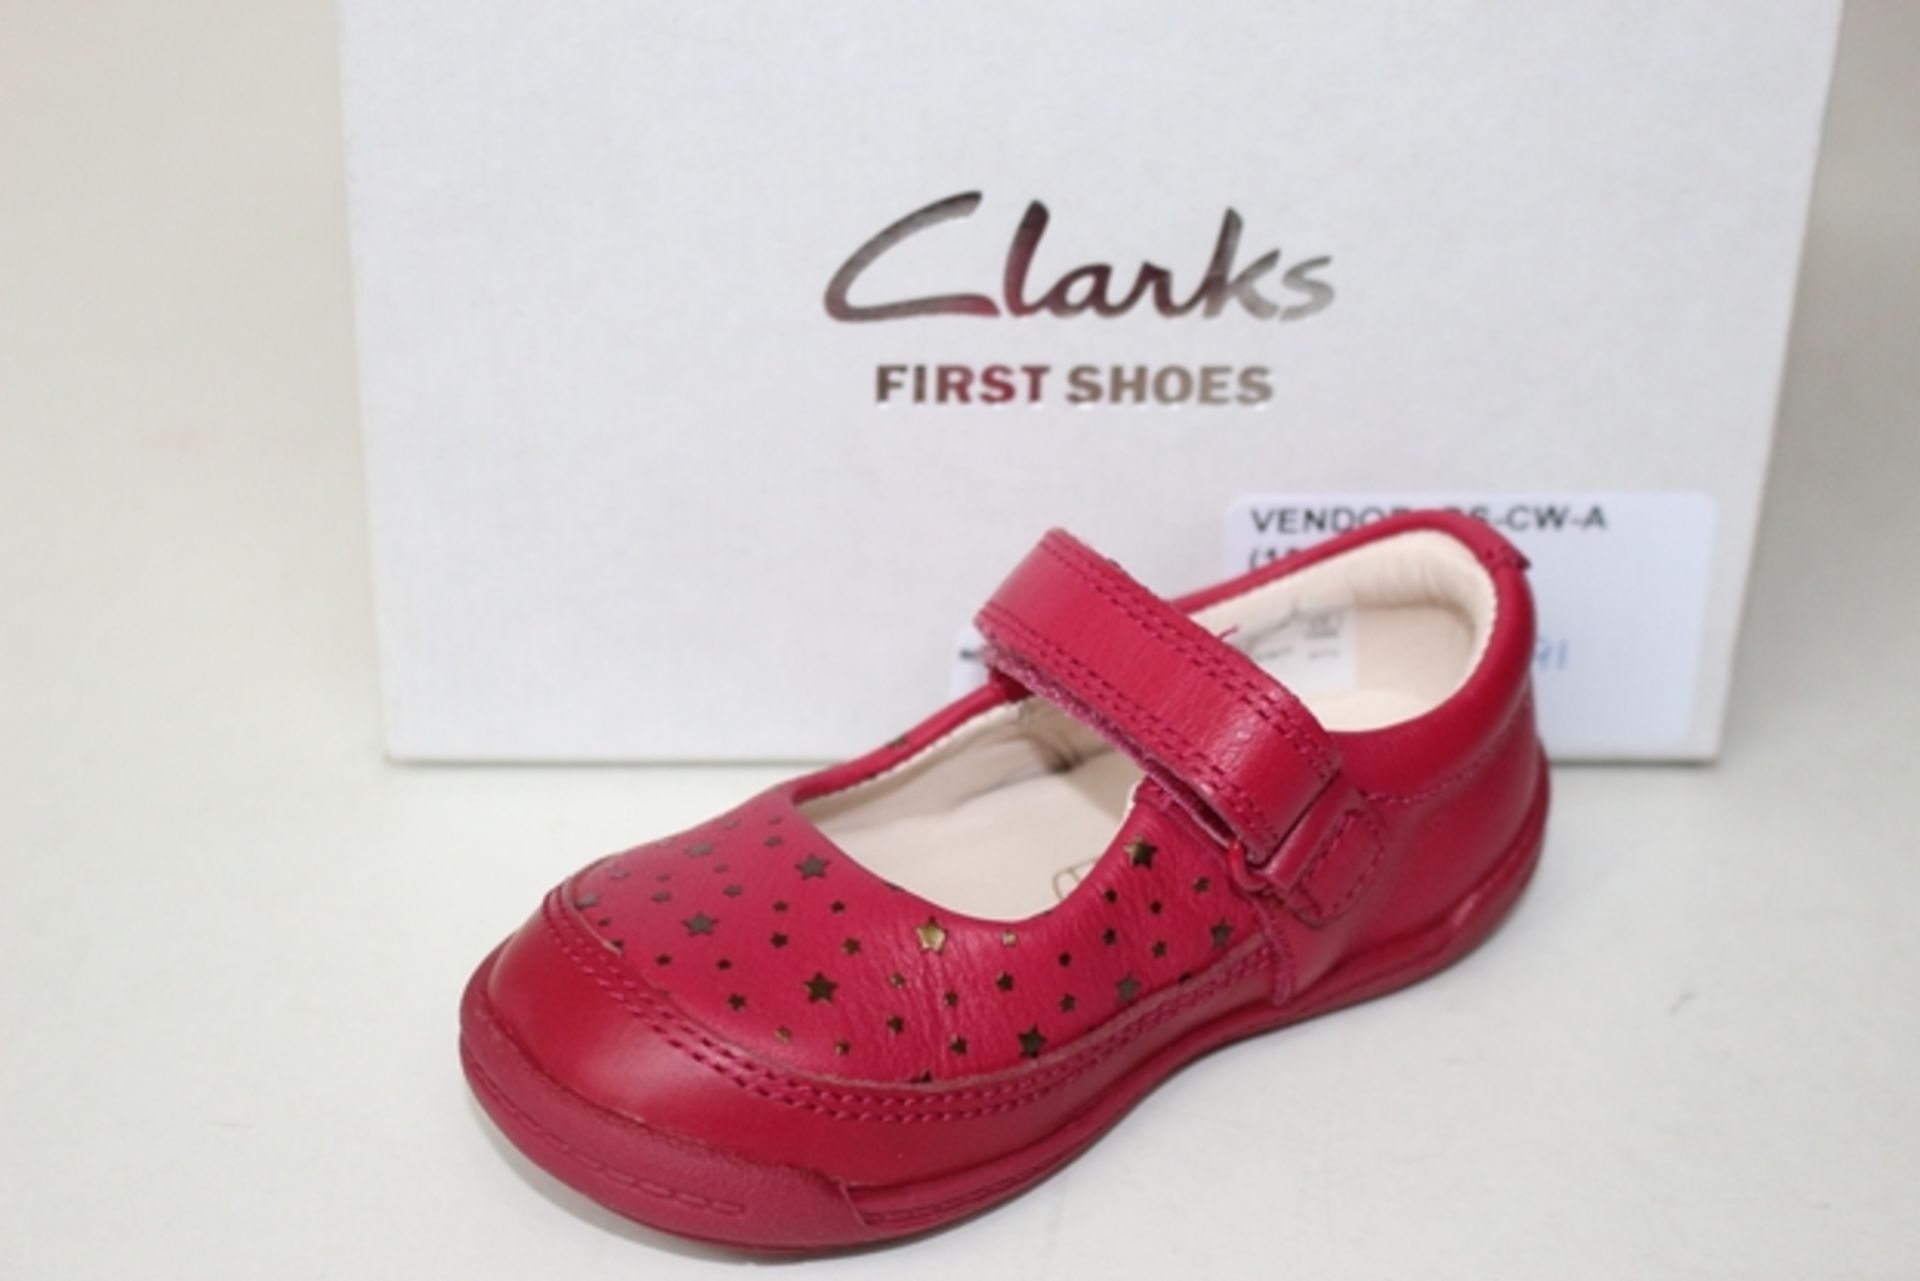 1X BOXED UNUSED PAIR OF CLARKES CHILDREN'S SHOES SIZE 4H RRP £30 (DS-CW-A) (44.091)